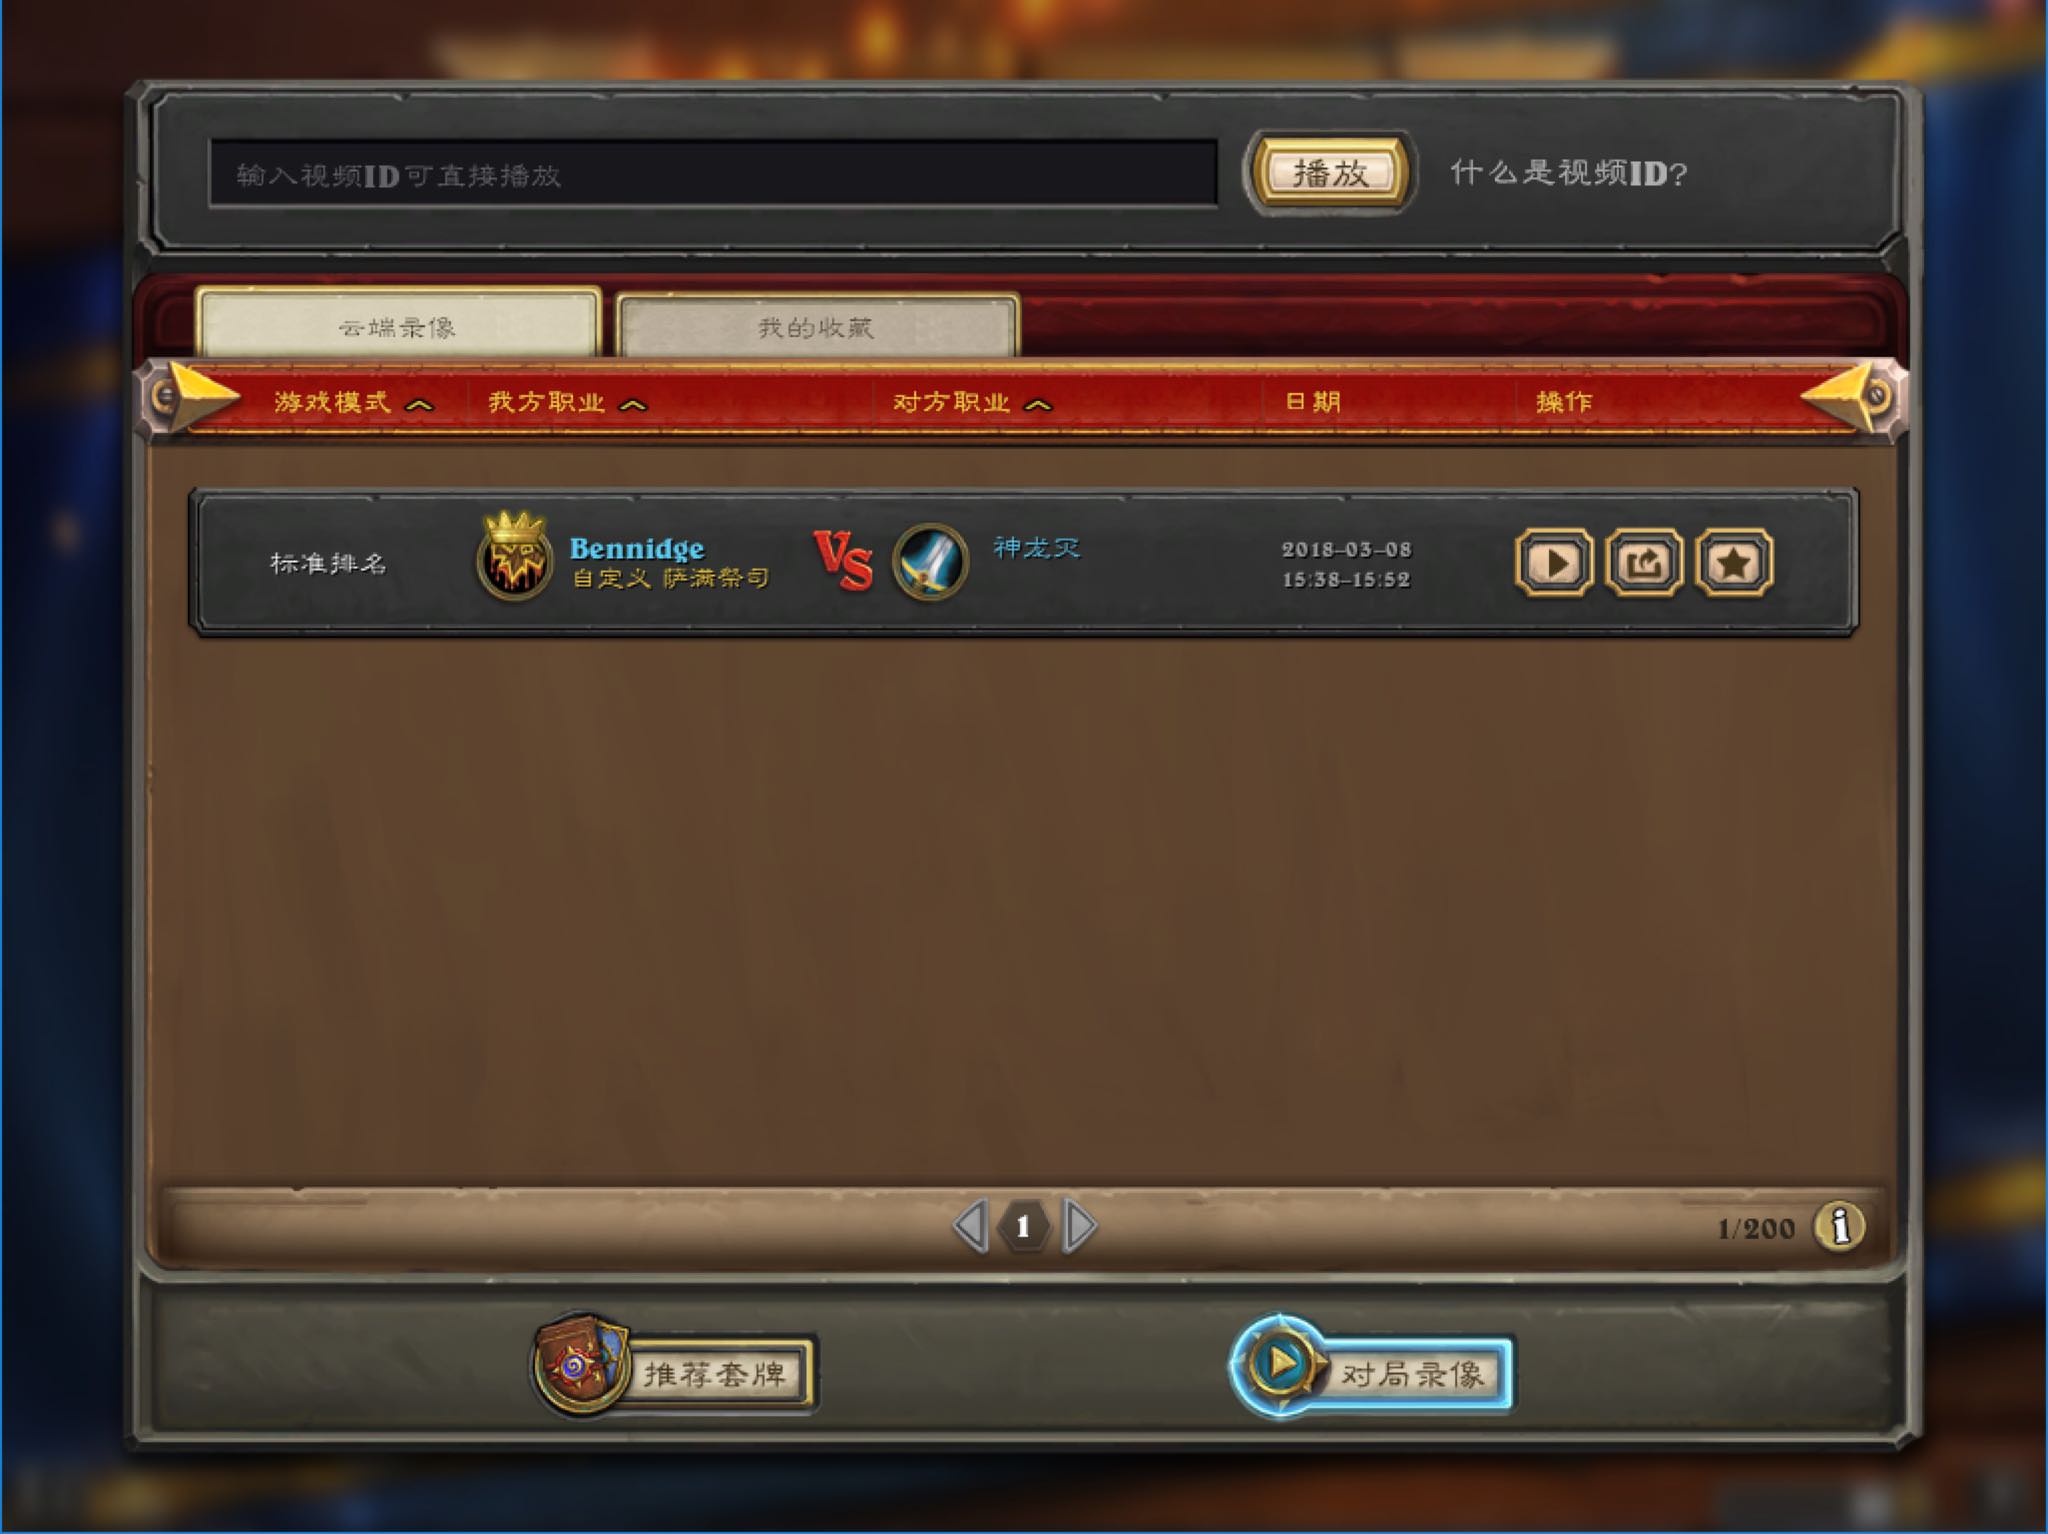 Pro-China Hearthstone accounts are trolling leaderboards - GameRevolution